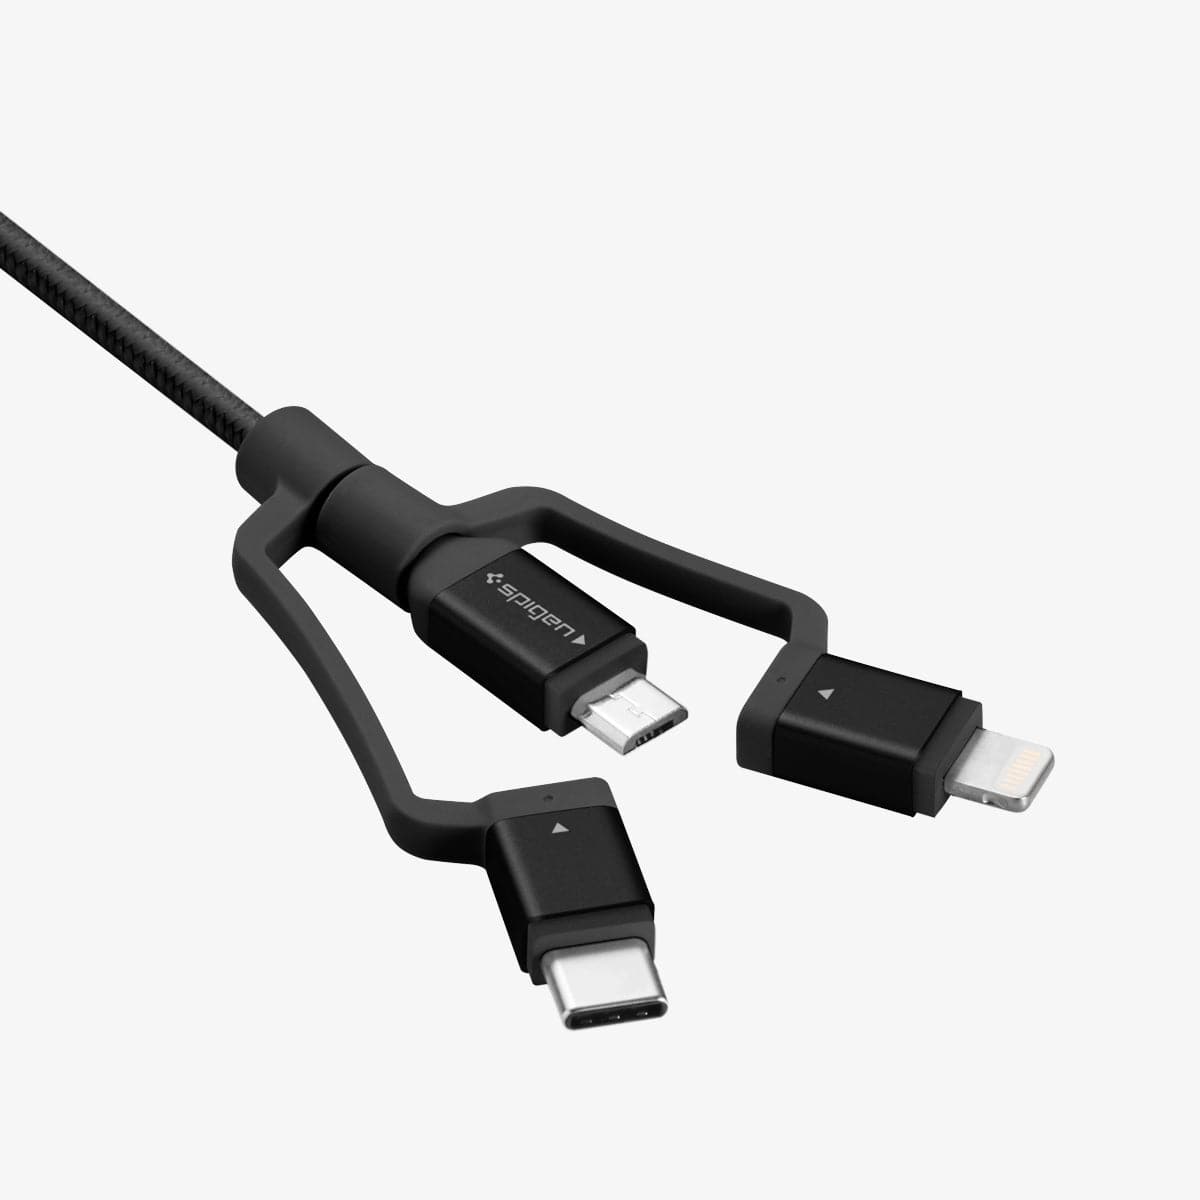 000CB22774 - DuraSync 3-in-1 Charger Cable in black showing the USB output and the Micro, lightning, and USB-C output